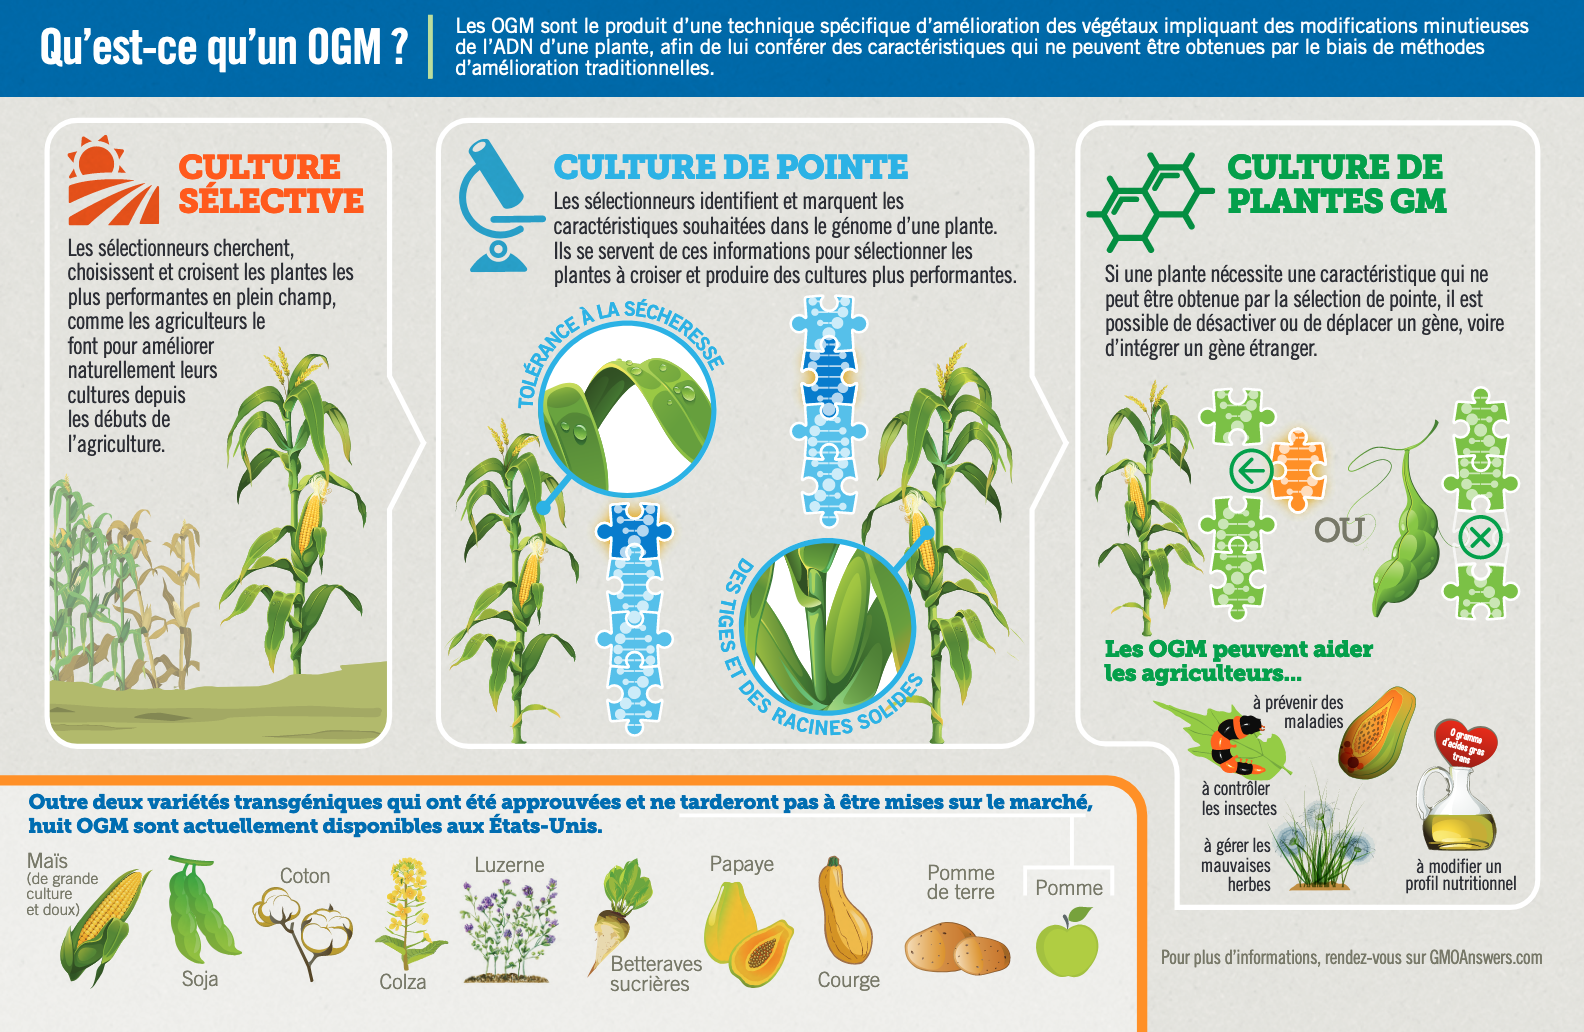 What Is a GMO?